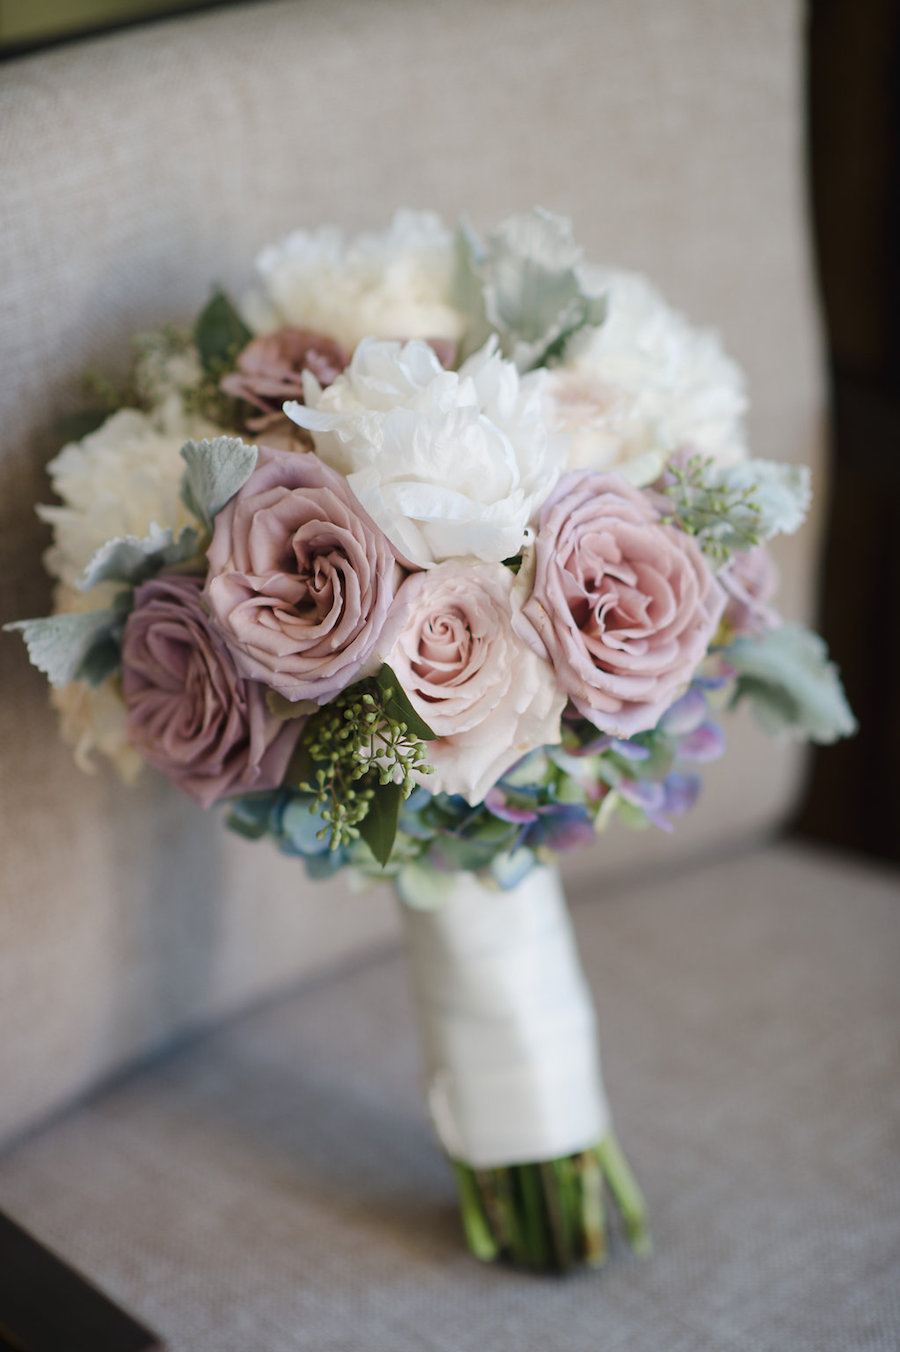 White and Blush Pink Dusty Rose Wedding Bouquet with Succulents and Greenery